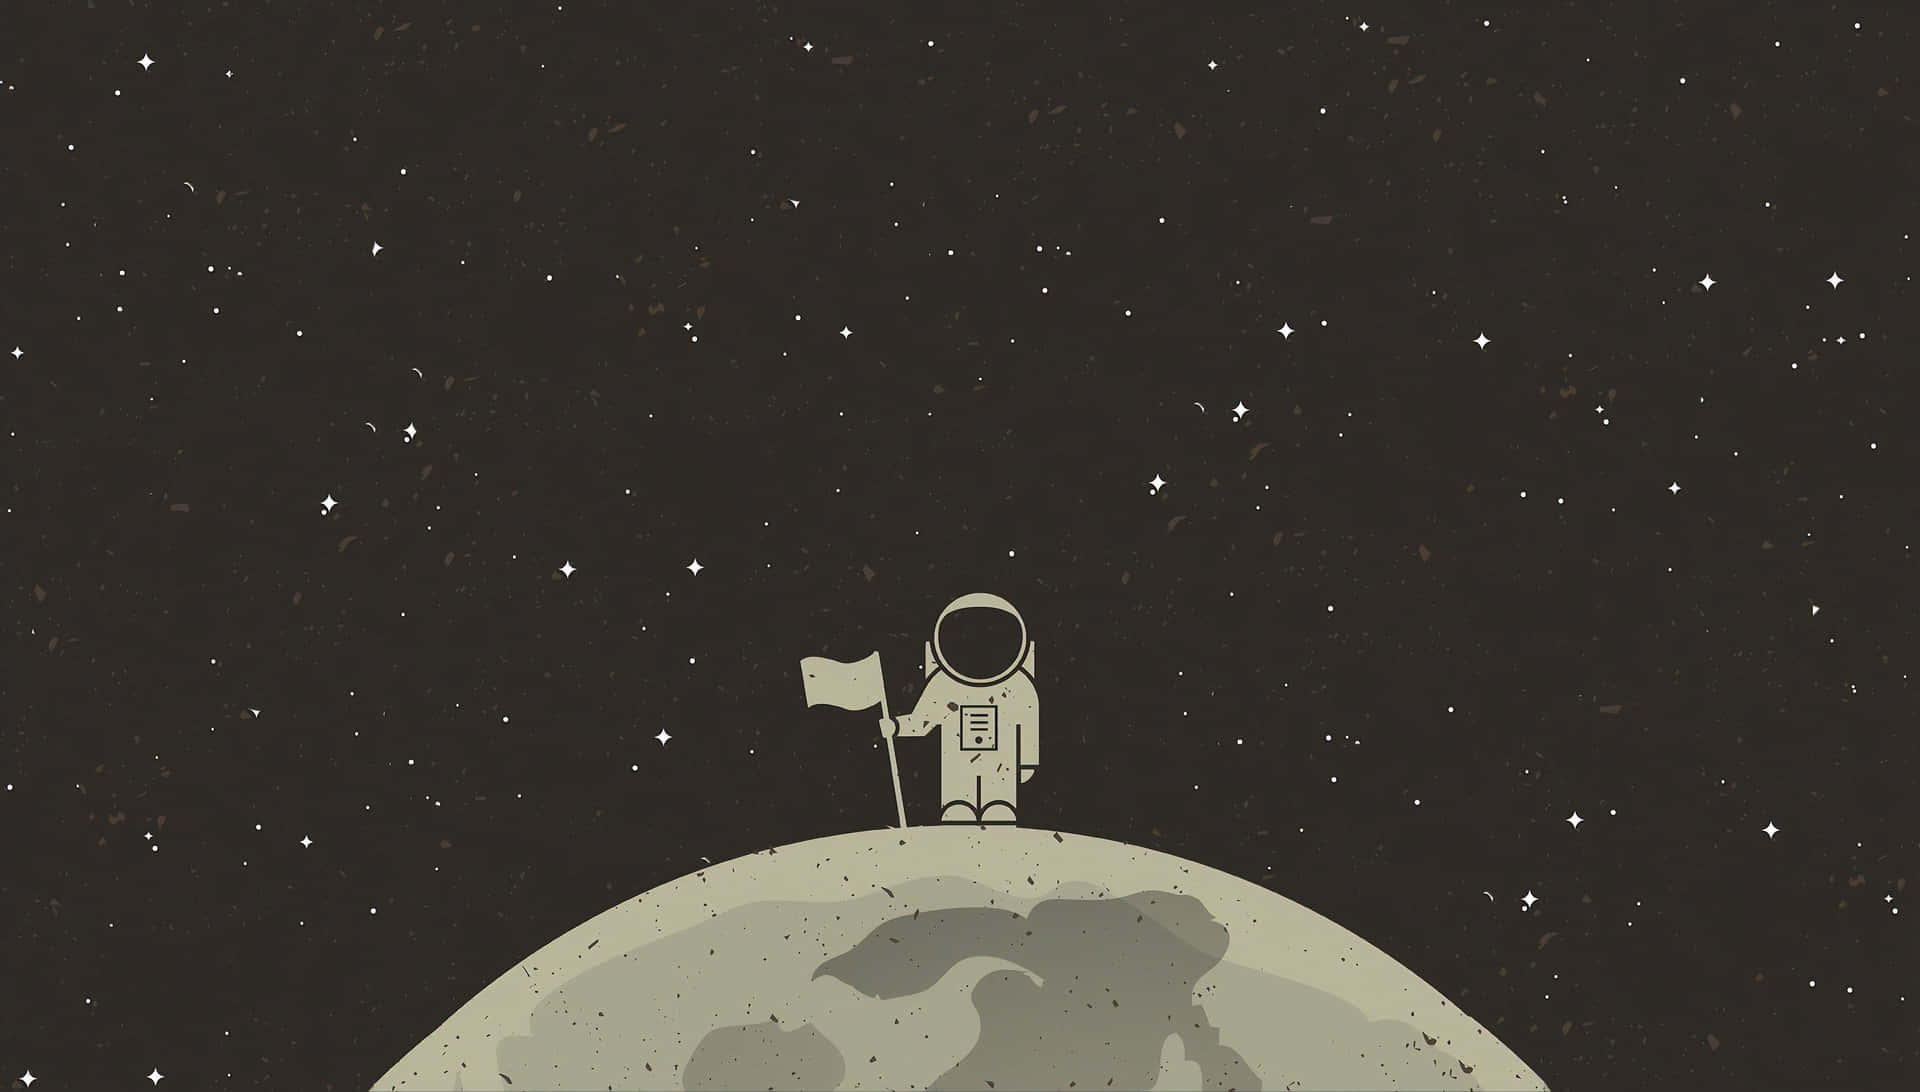 Lone Astronaut Exploring The Cratered Lunar Surface Wallpaper